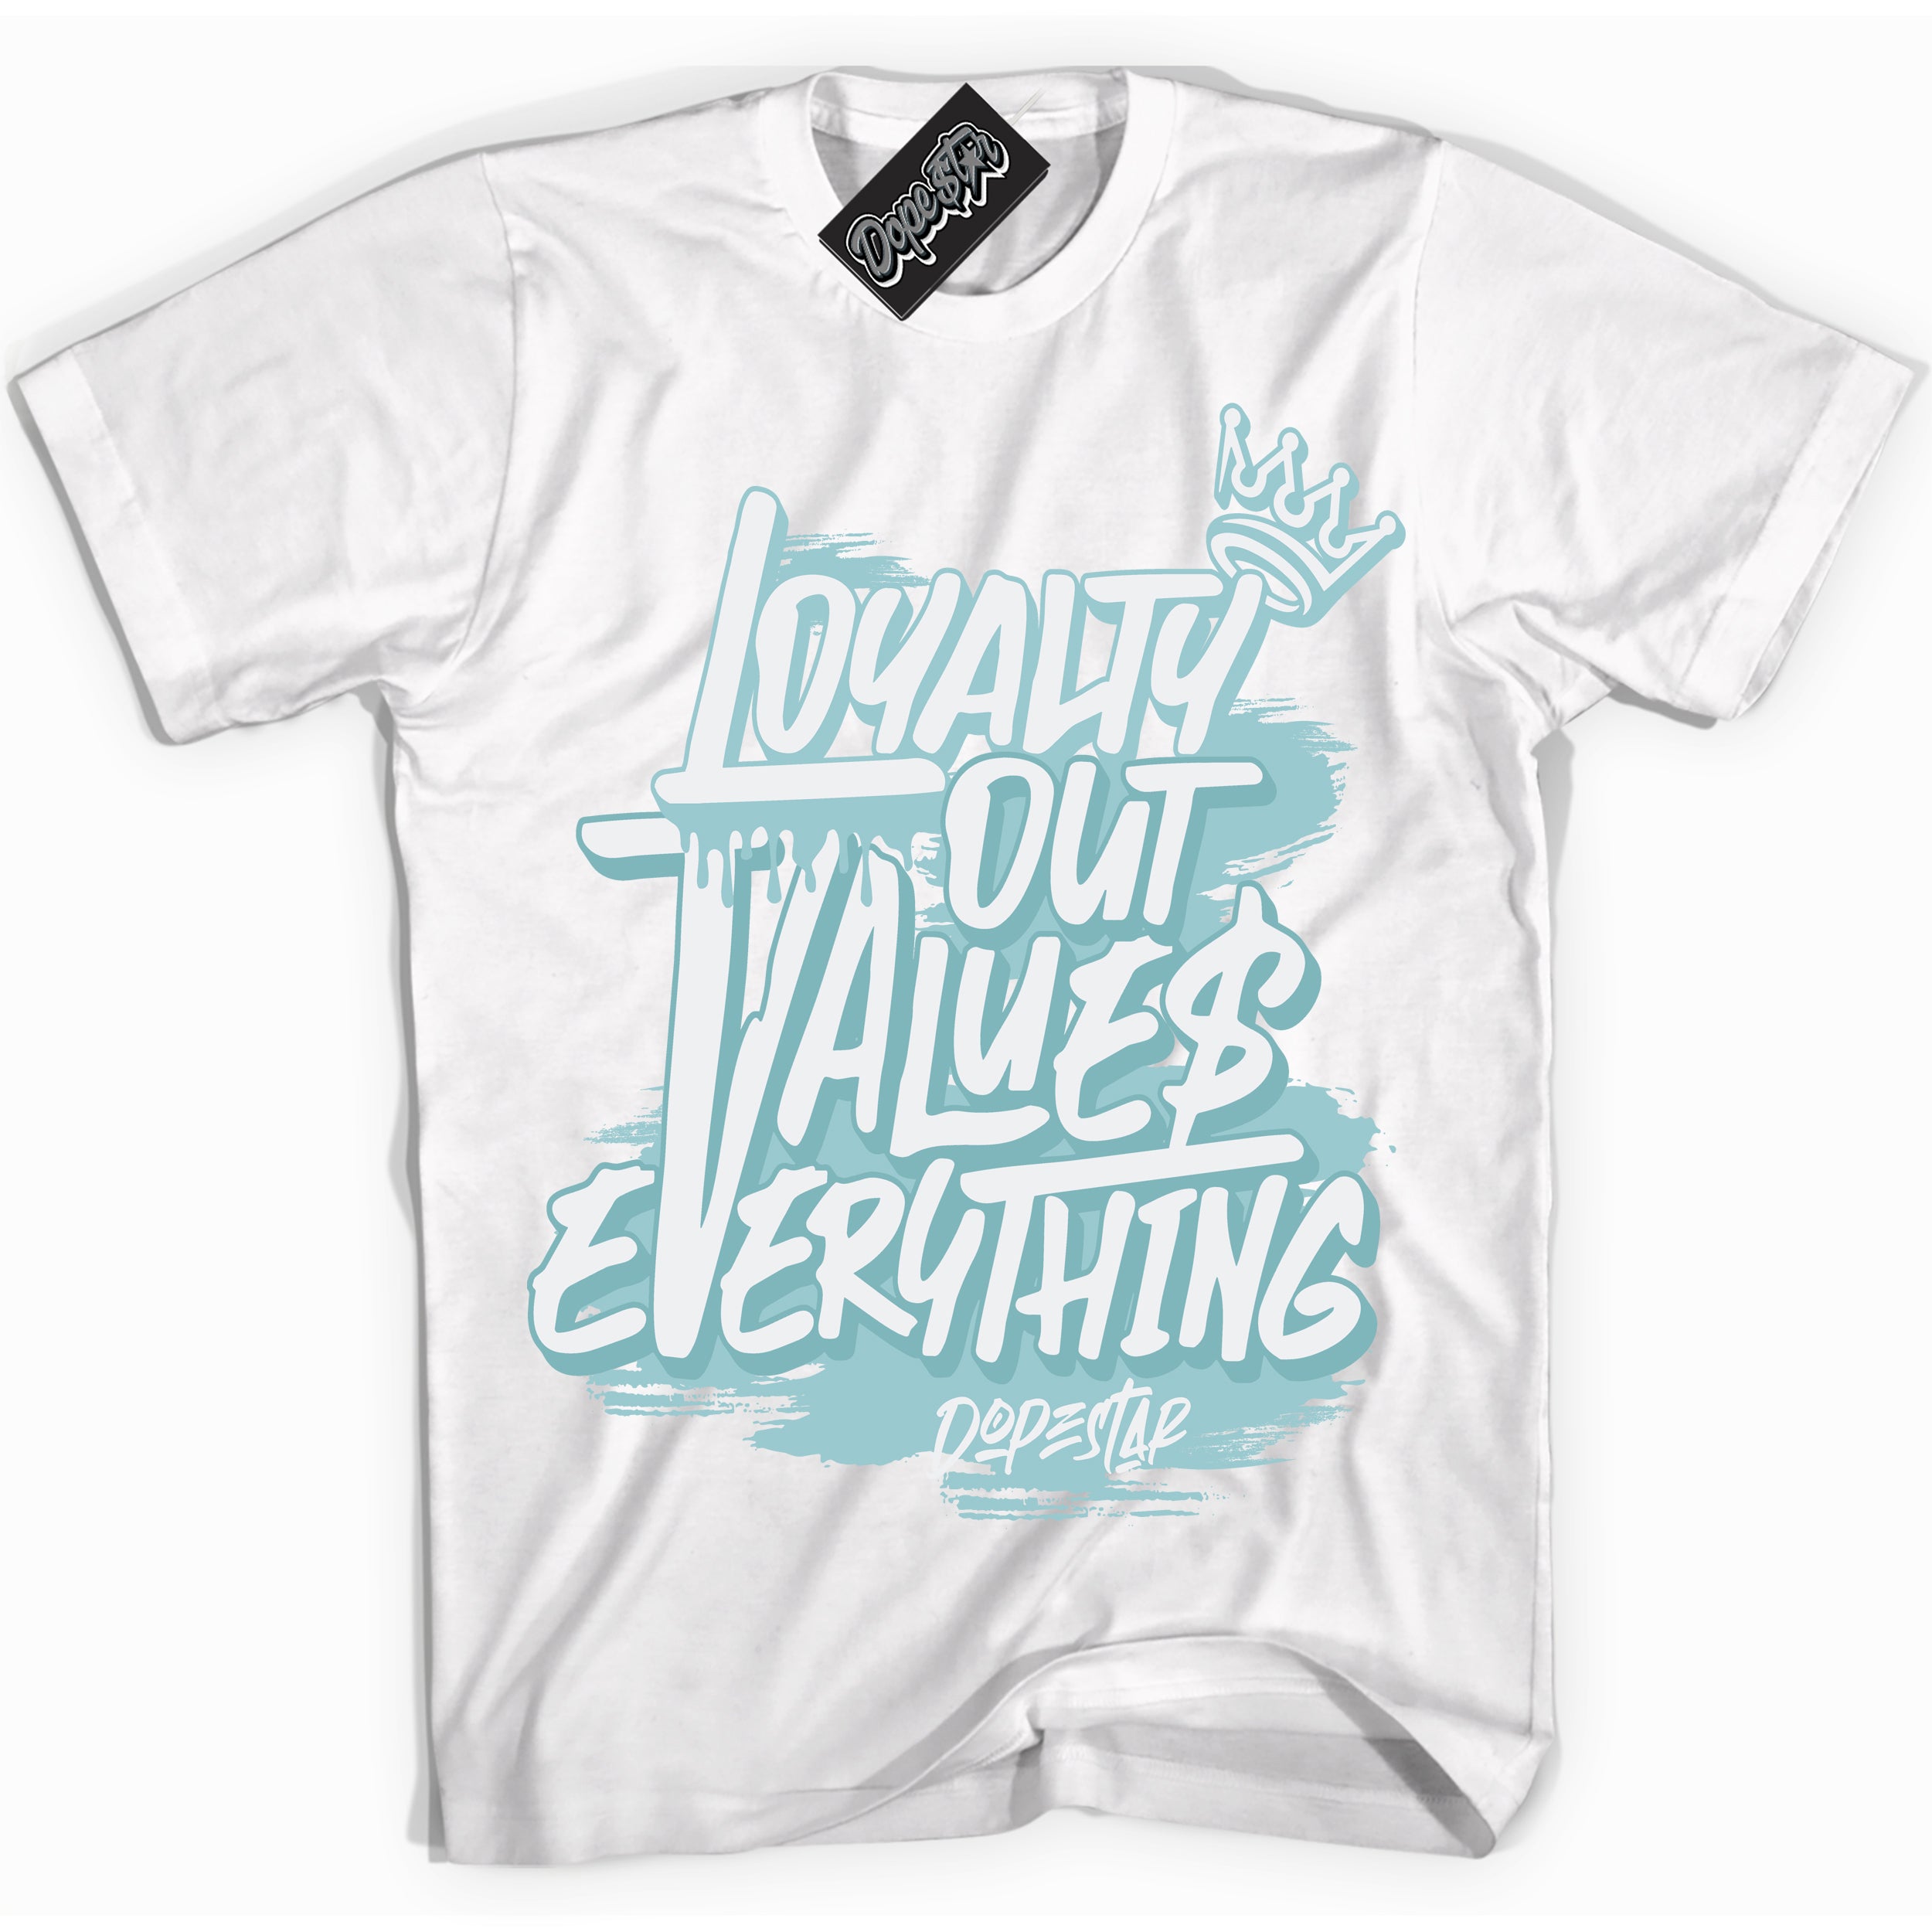 Cool White Shirt with “ Loyalty Out Values Everything” design that perfectly matches AJKO Bleached Aqua 1s Sneakers.